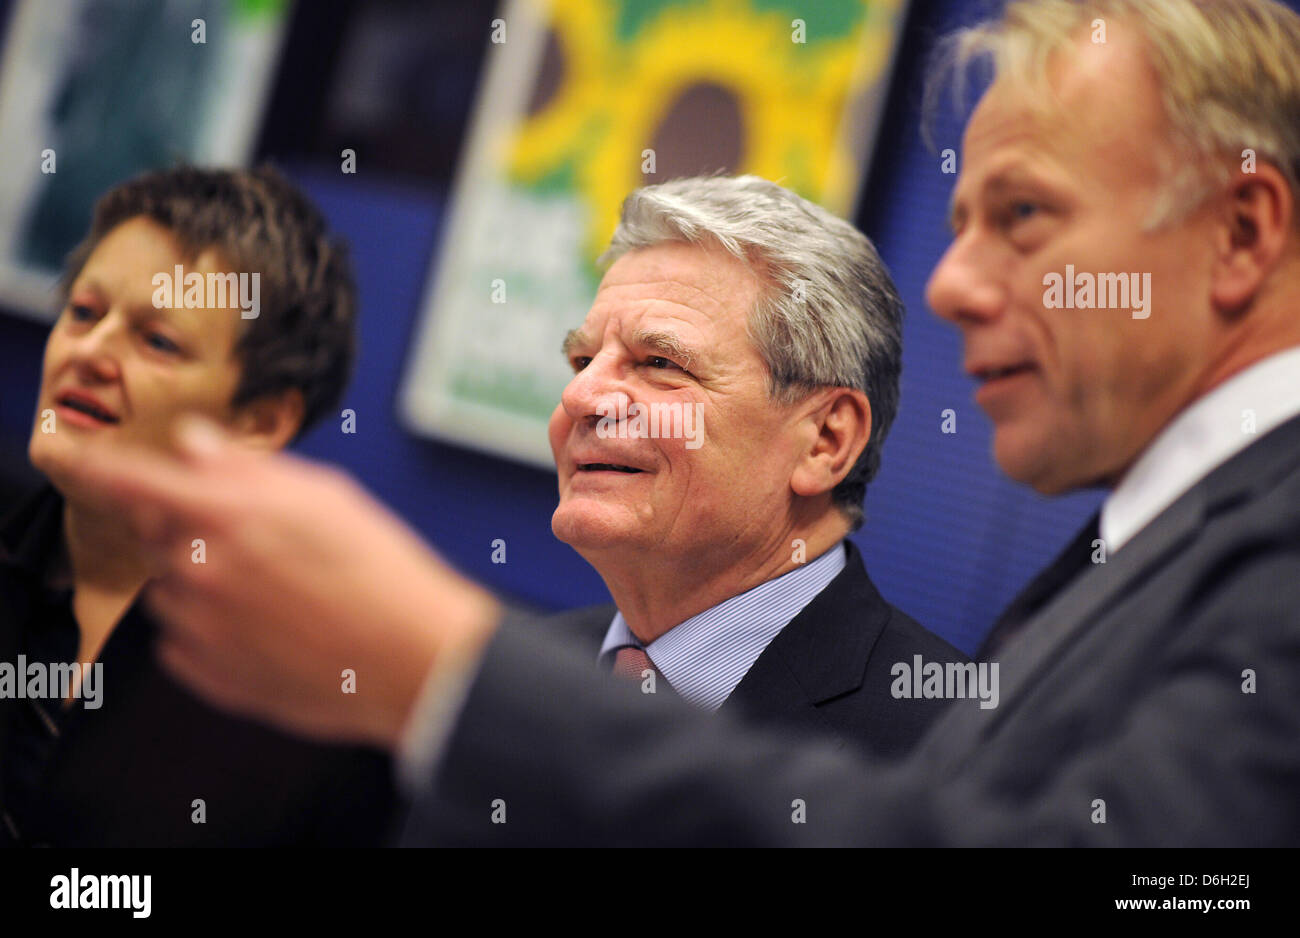 Joachim Gauck (C), candidate for the office of German President, talks with the leaders of the Green Party, Renate Kuenast and Juergen Trittin (R), before the start of a meeting of The Greens parliamentary party group in the Reichstag building in Berlin, Germany, 28 February 2012. Gauck, who was nominated as German President by the CDU/CSU, SPD, FDP and Alliance 90/The Greens, is i Stock Photo